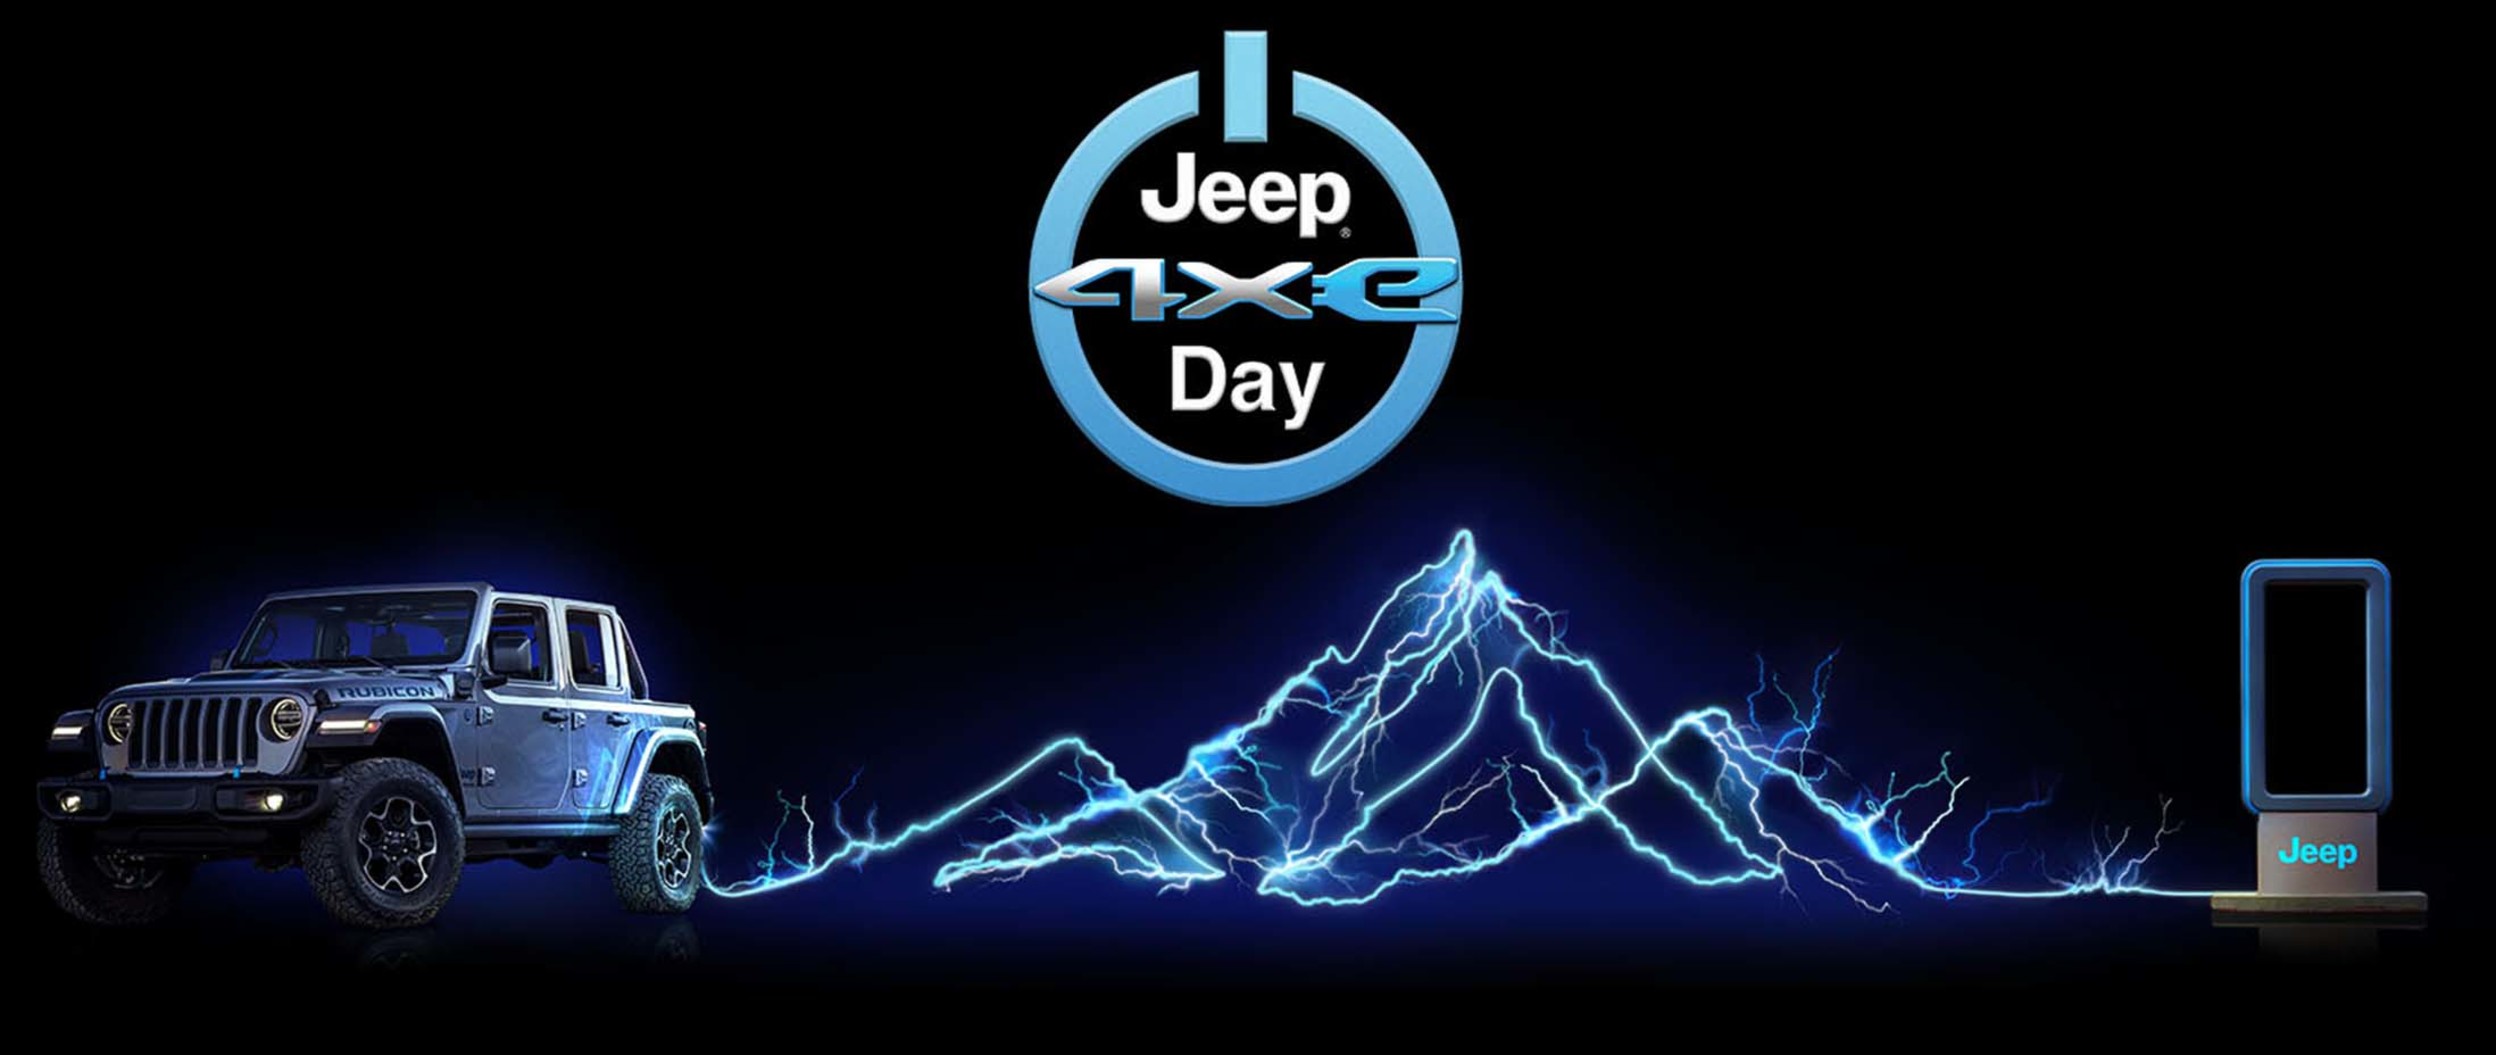 View of grey Jeep 4xe against a black background with blue mountain graphic outlines.